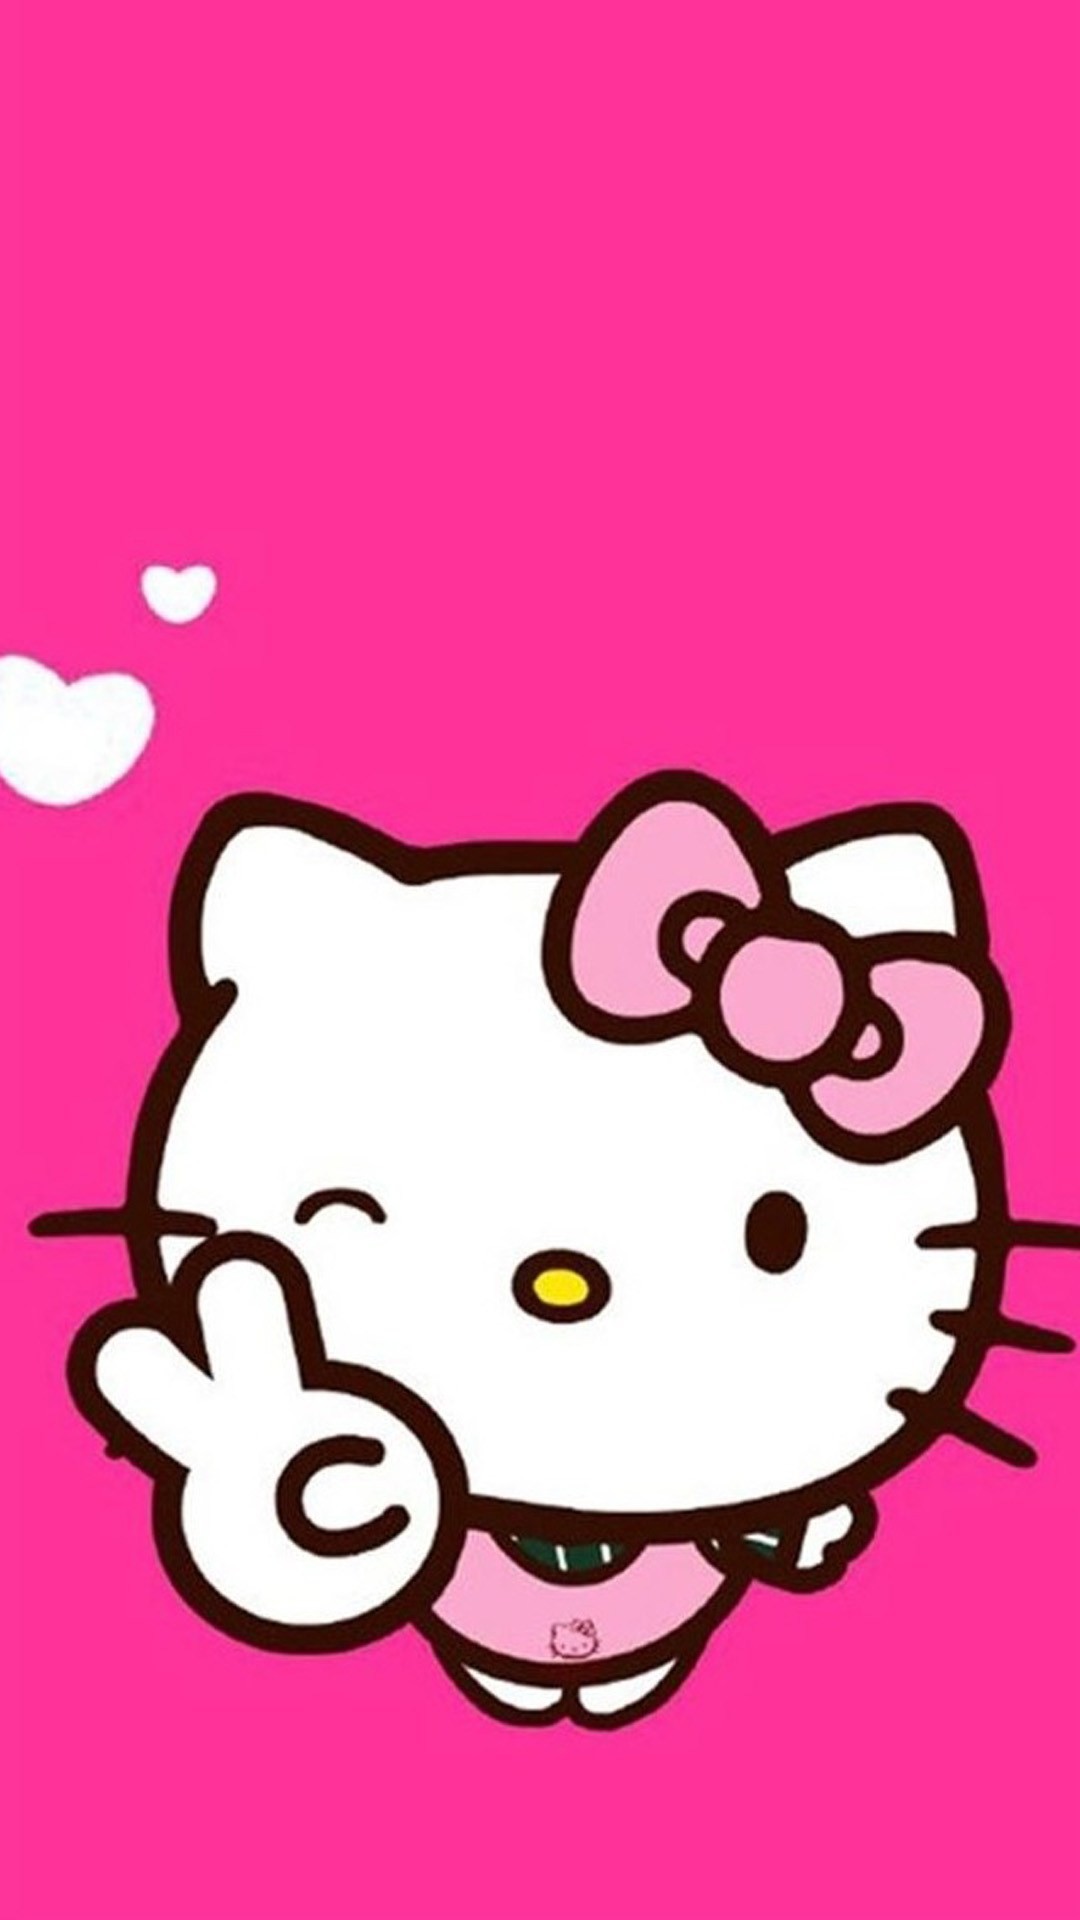 Cute wallpaper for Whatsapp featuring Hello Kitty in pink.